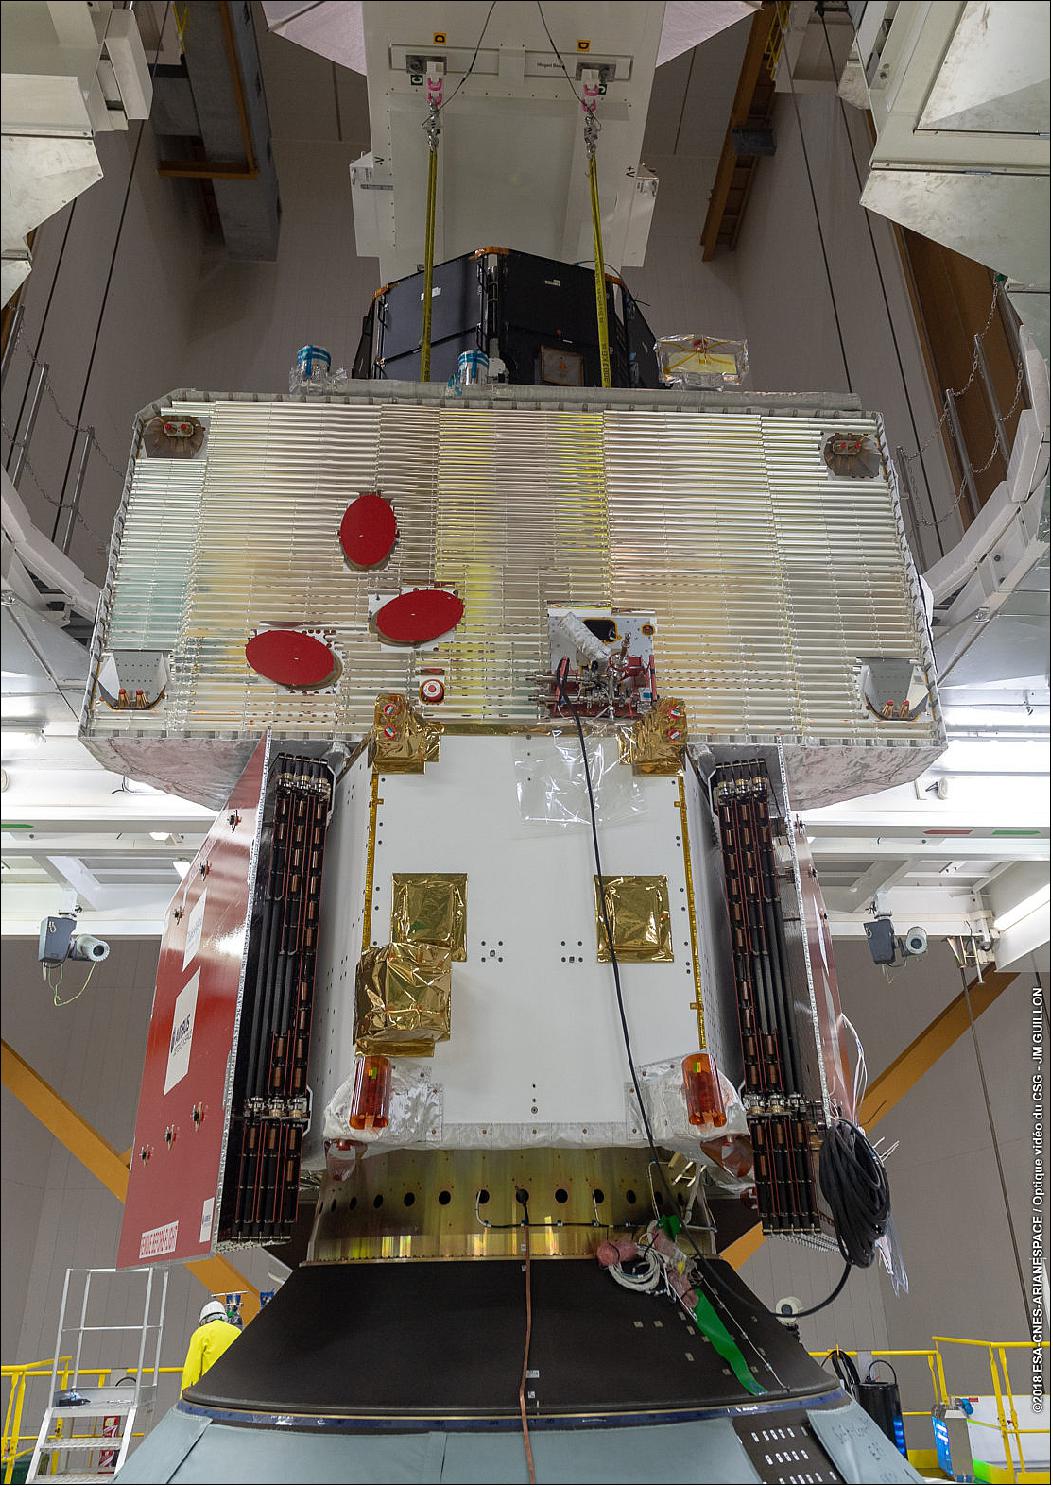 Figure 127: The BepiColombo spacecraft stack mounted on the launcher (image credit: ESA/CNES/Arianespace/Optique video du CSG – JM Guillon)